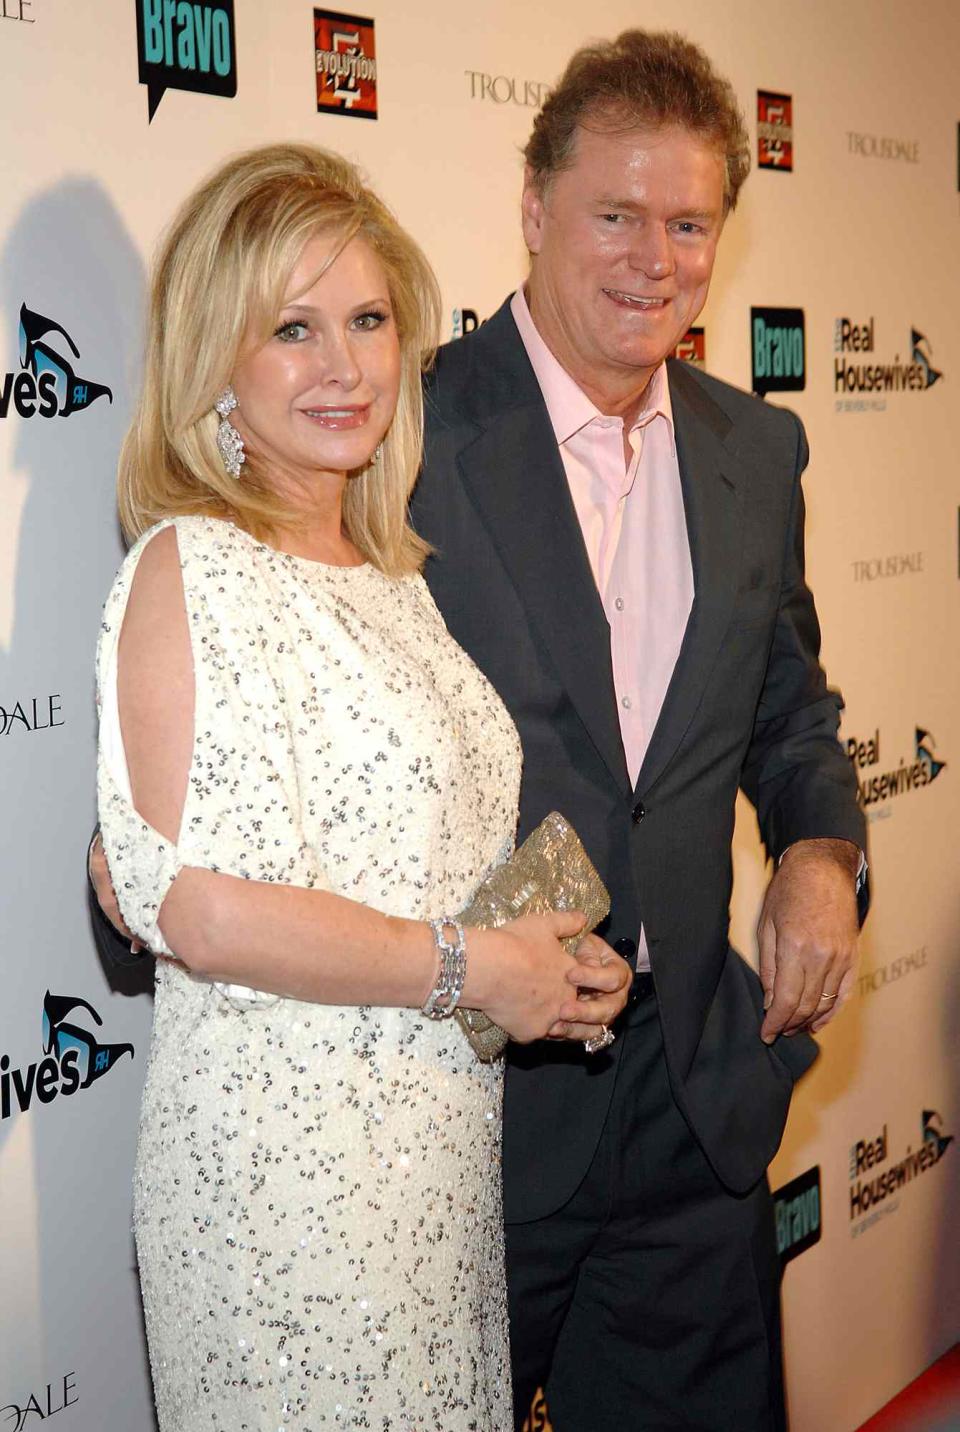 Kathy Hilton and Rick Hilton attend the "Real Housewives of Beverly Hills" Premiere Party at Trousdale on October 11, 2010 in West Hollywood, California